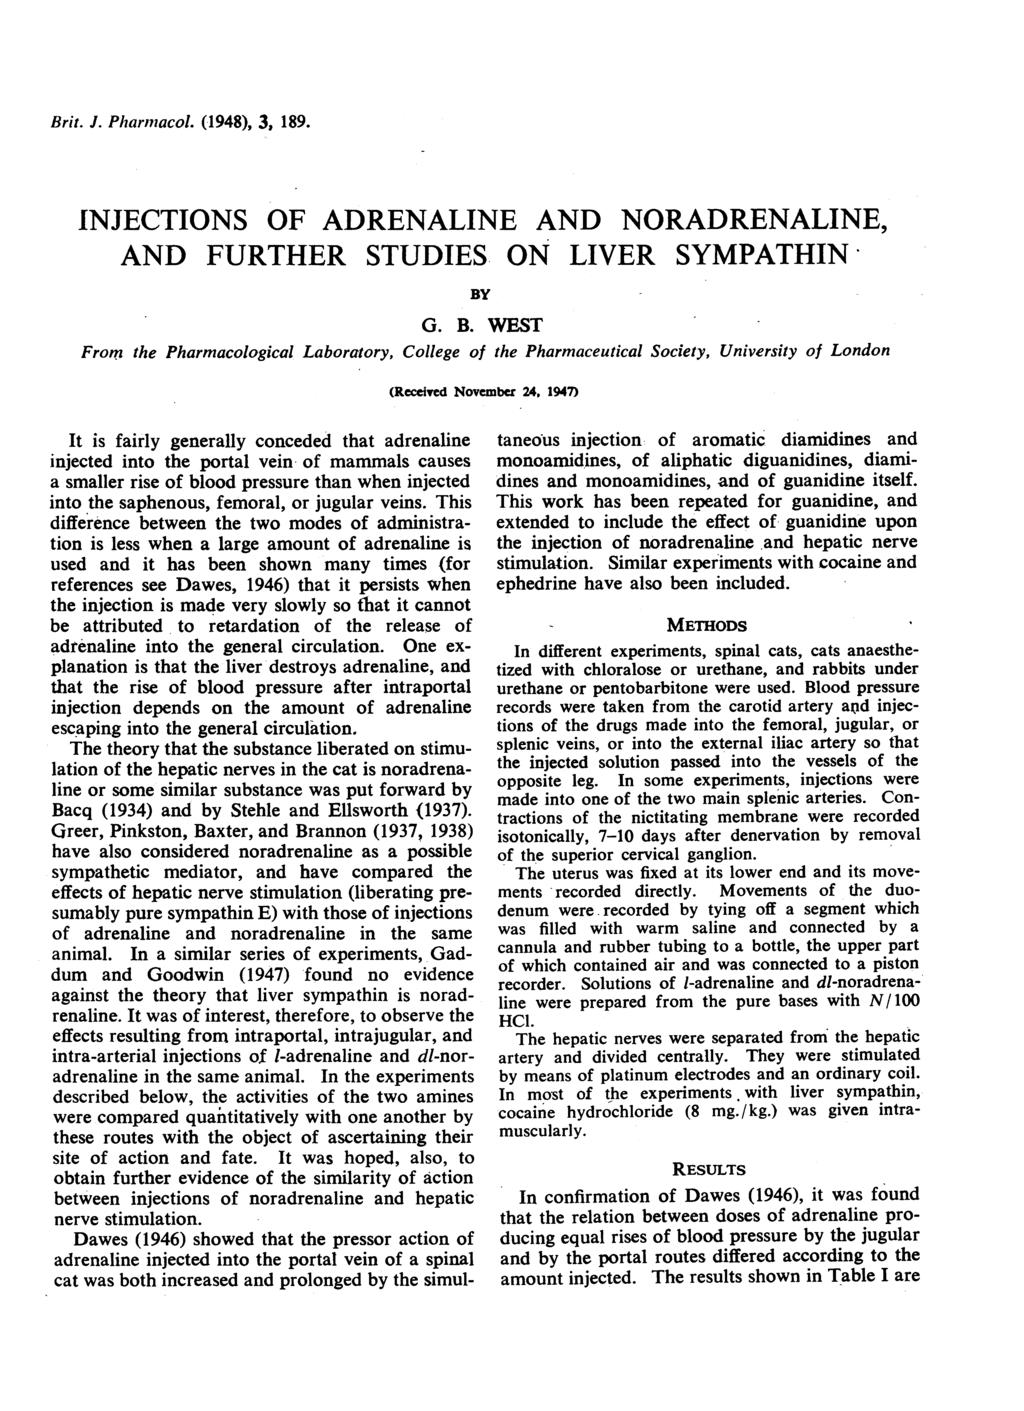 Brit. J. Pharmacol. (1948), 3, 189. INJECTIONS OF ADRENALINE AND NORADRENALINE, AND FURTHER STUDIES ON LIVER SYMPATHIN BY